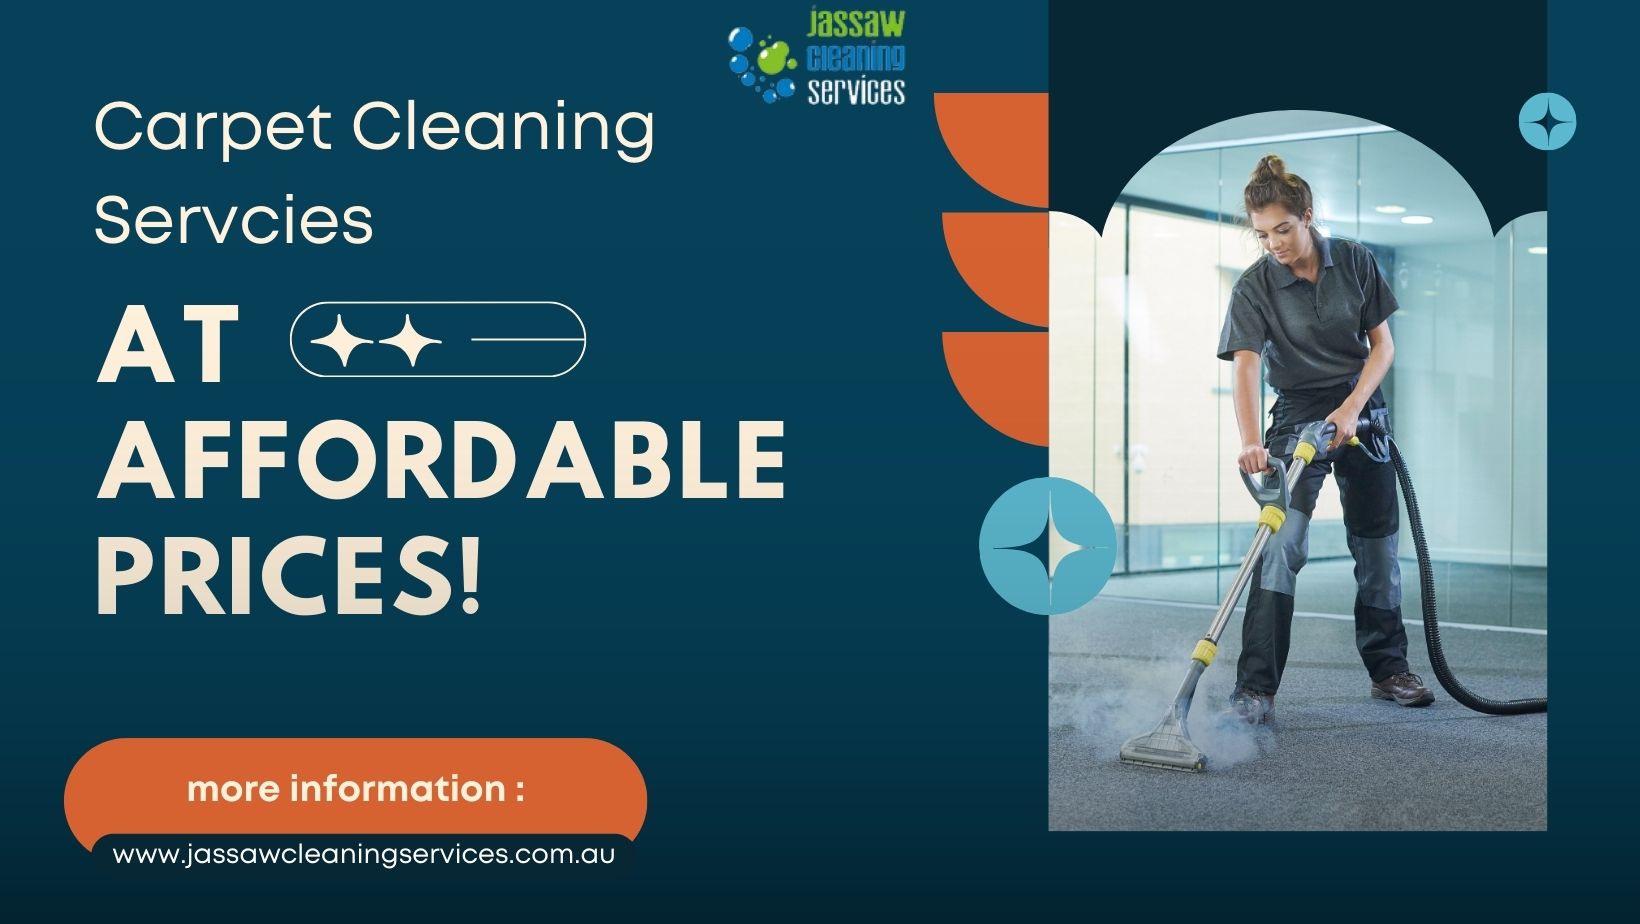  Cost-effective carpet cleaning services in Canberra and Queanbeyan